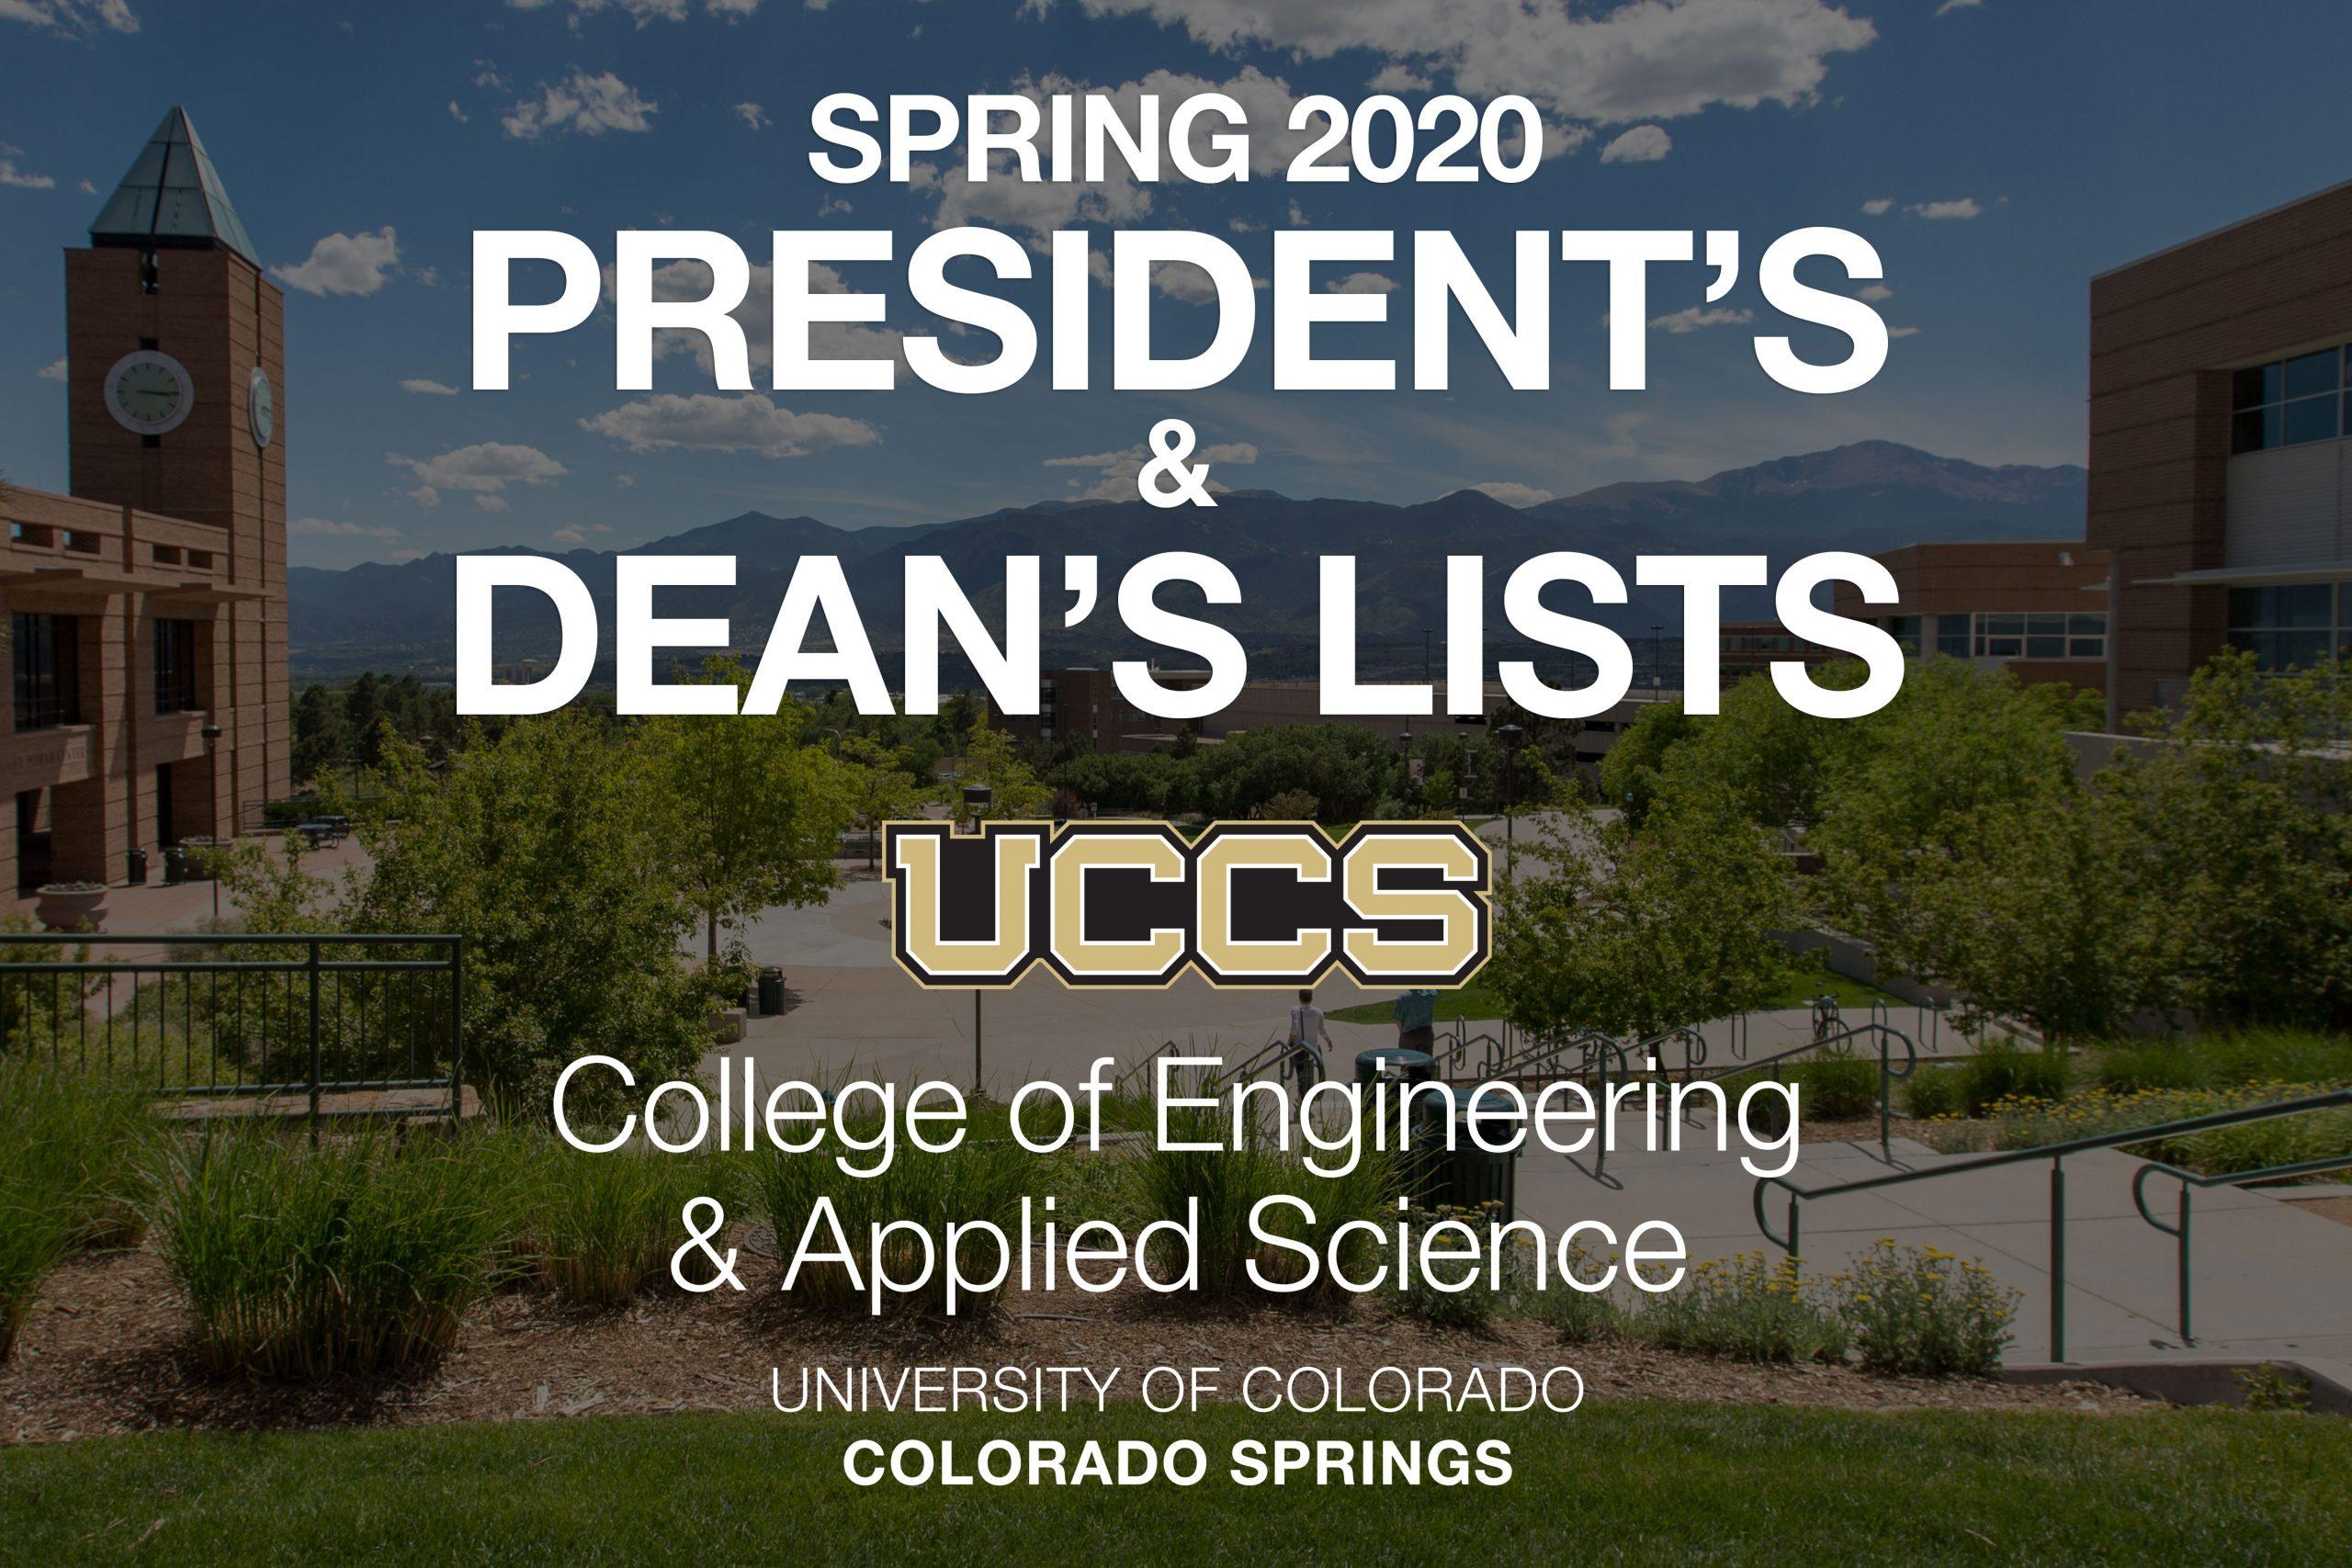 Text and graphic for the spring 2020 President's and Dean's List for the College of Engineering and Applied Science